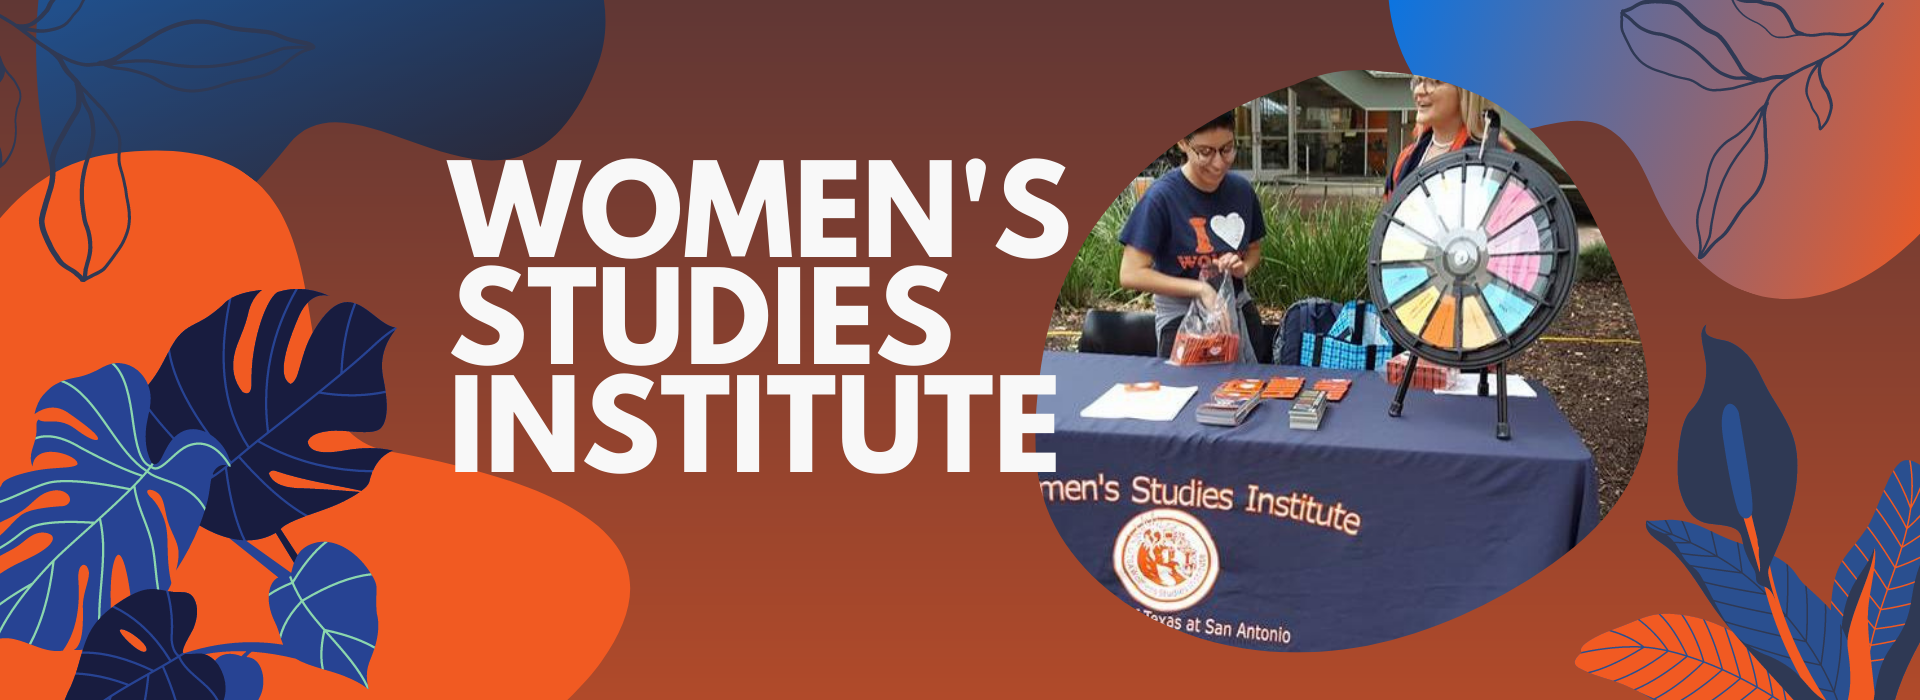 The Women's Studies Institute Header of Student and Faculty